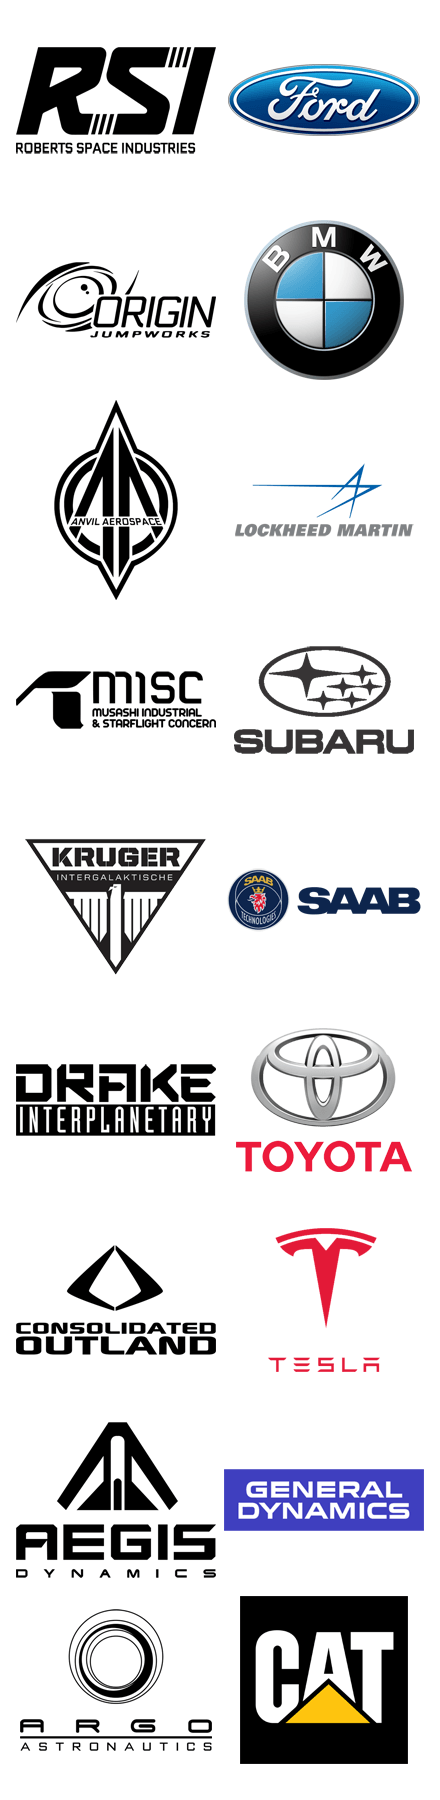 Vehicle Manufacturer Logo - Vehicle Manufacturer Logos Next To Real World Inspirations Or